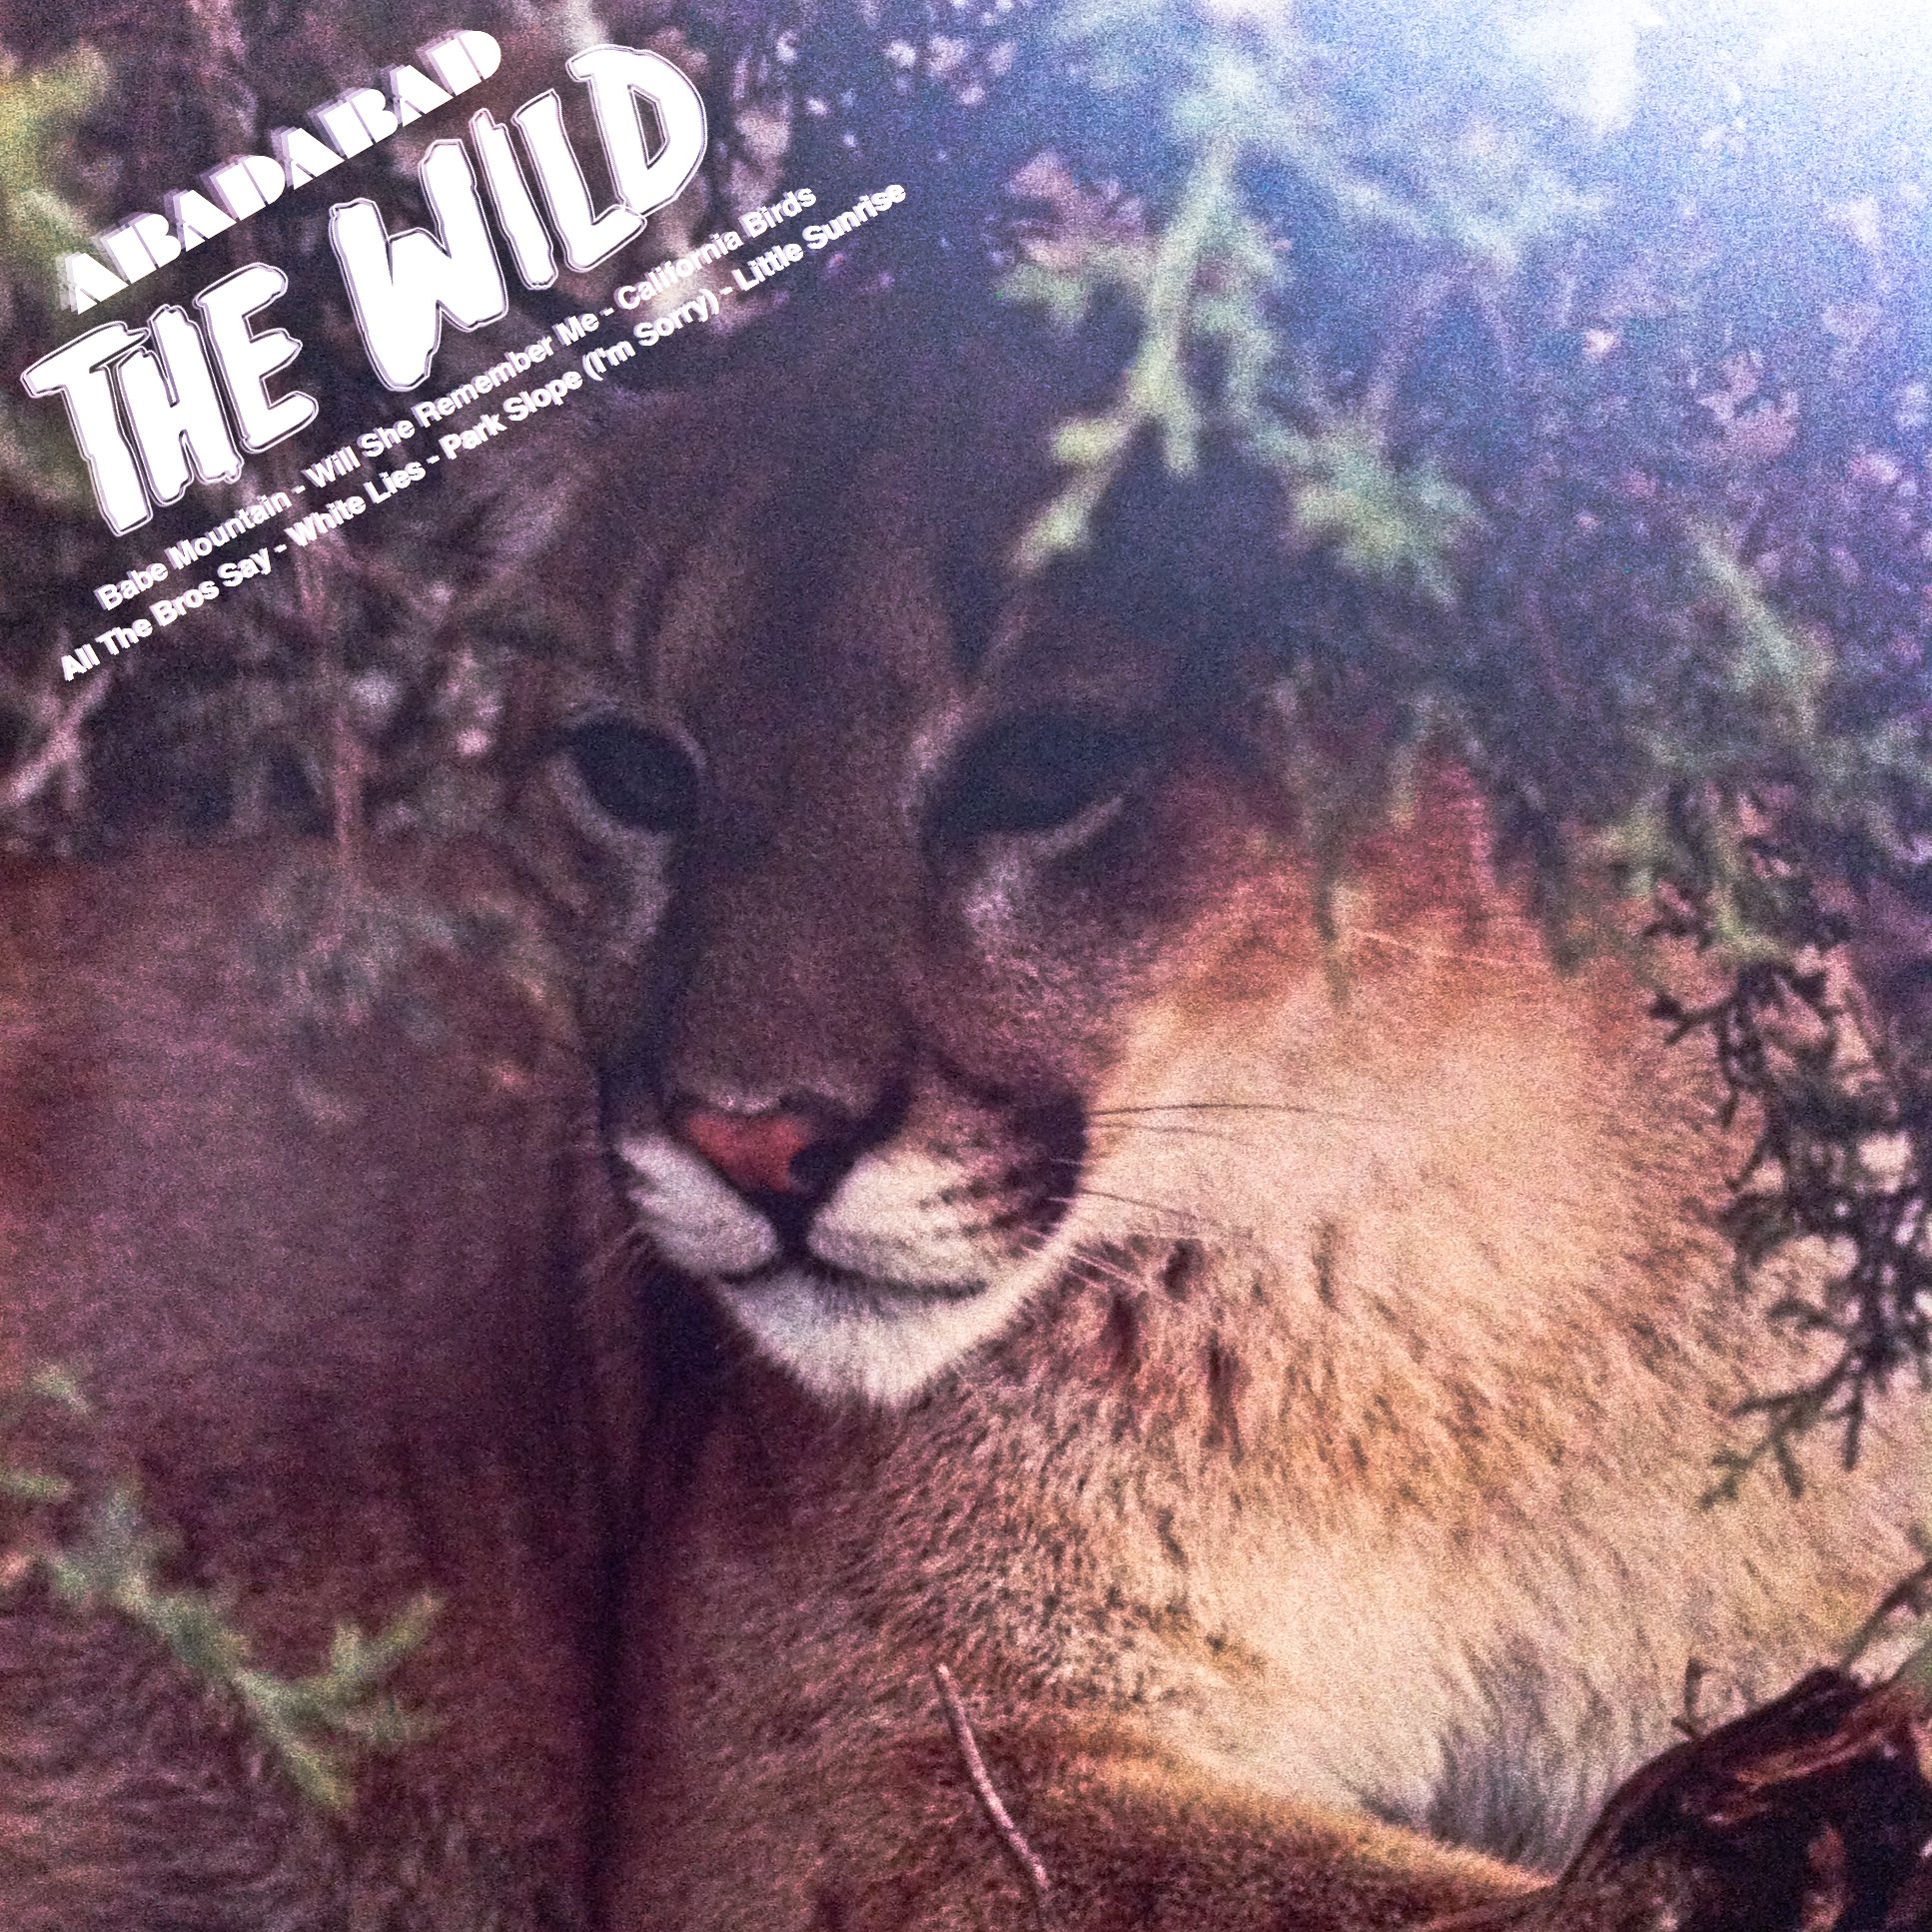 Abadabad's The Wild EP, released in September 2012 | photo courtesy of abadabad.bandcamp.com